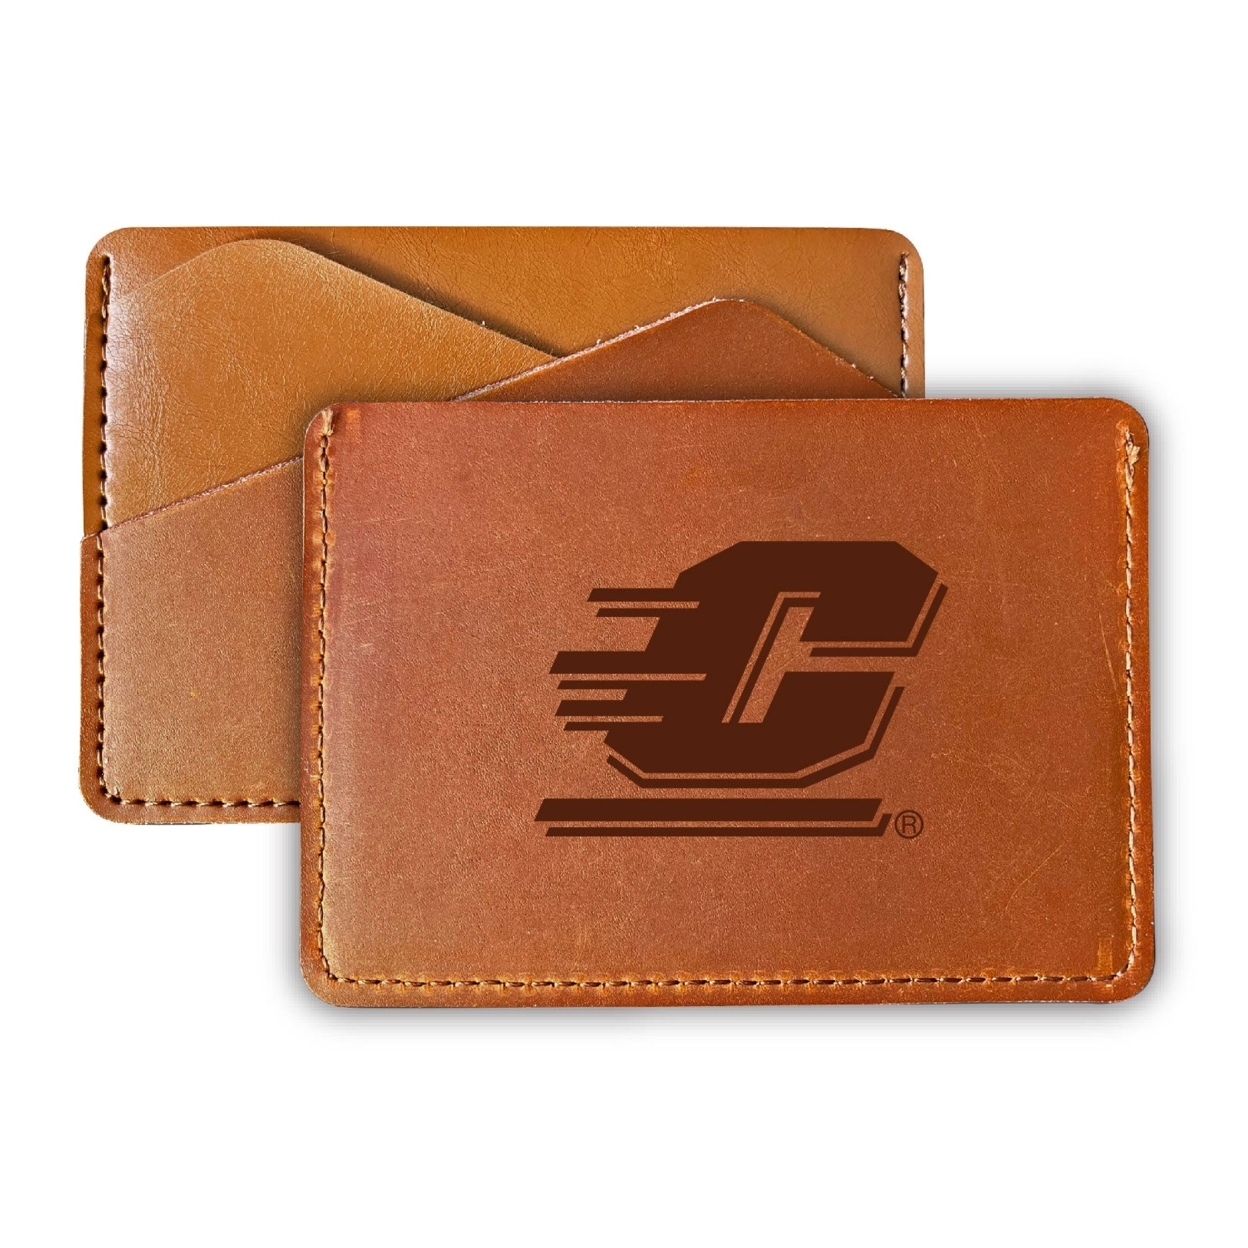 Central Michigan University College Leather Card Holder Wallet